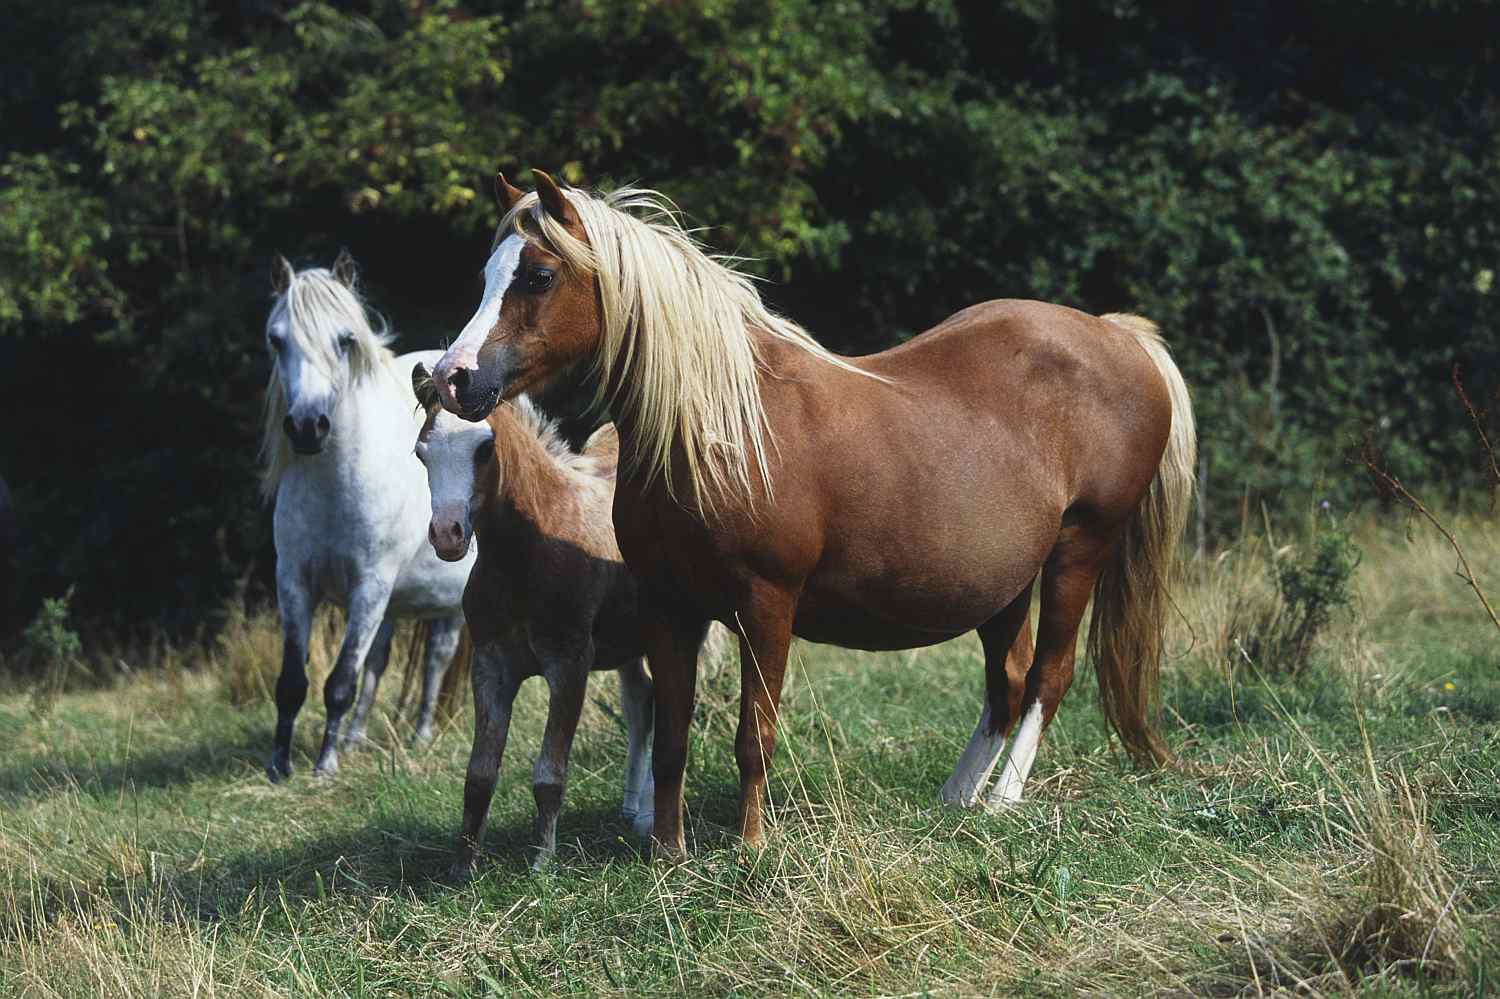 Pregnant mares and foal